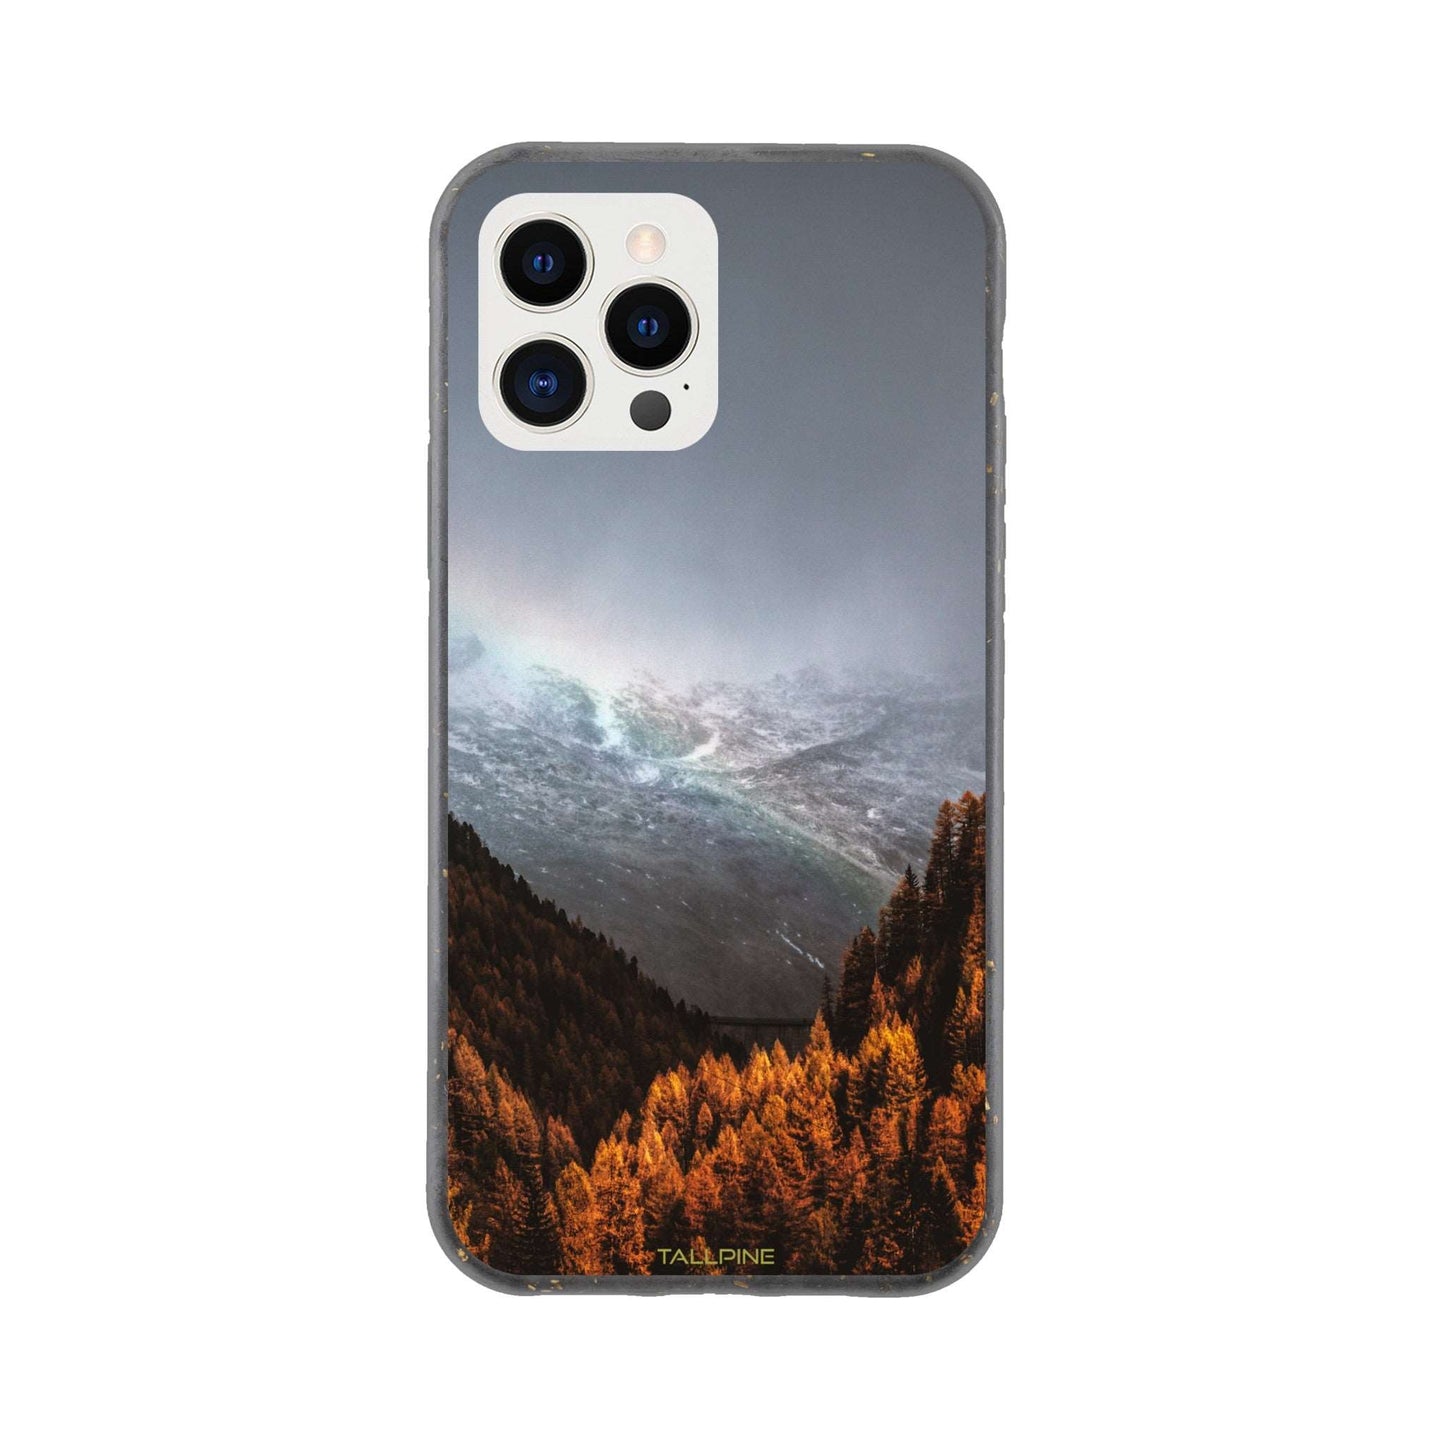 Autumn Mountain - Eco Case iPhone 12 Pro - Tallpine Cases | Sustainable and Eco-Friendly Phone Cases - Autumn Mountain Nature